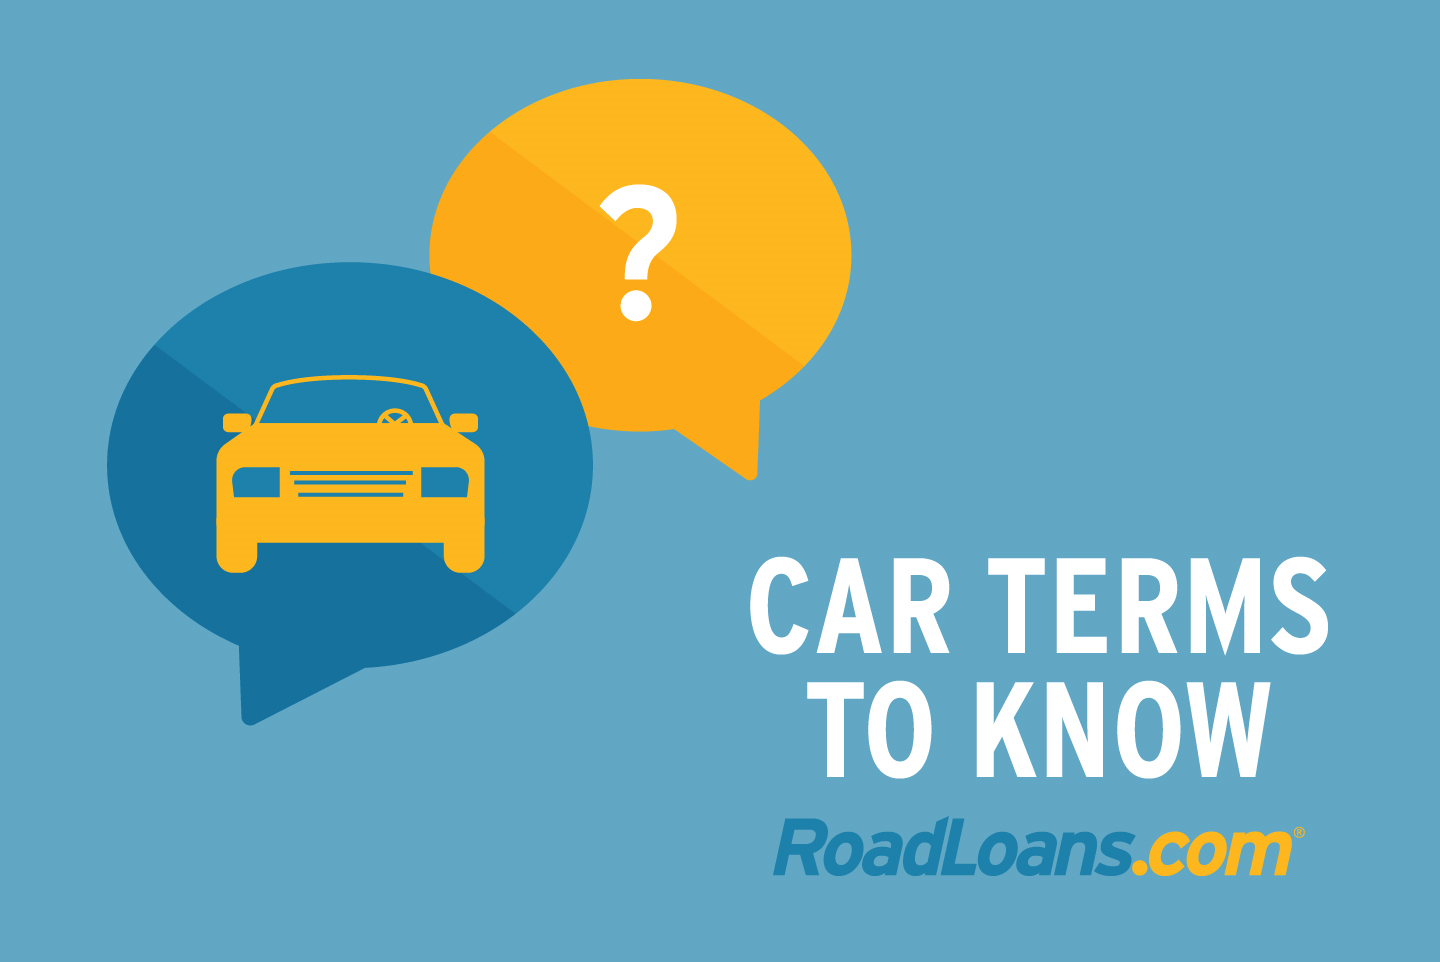 Save Some Cash Logo - Car Terms to Know to Save Money | RoadLoans